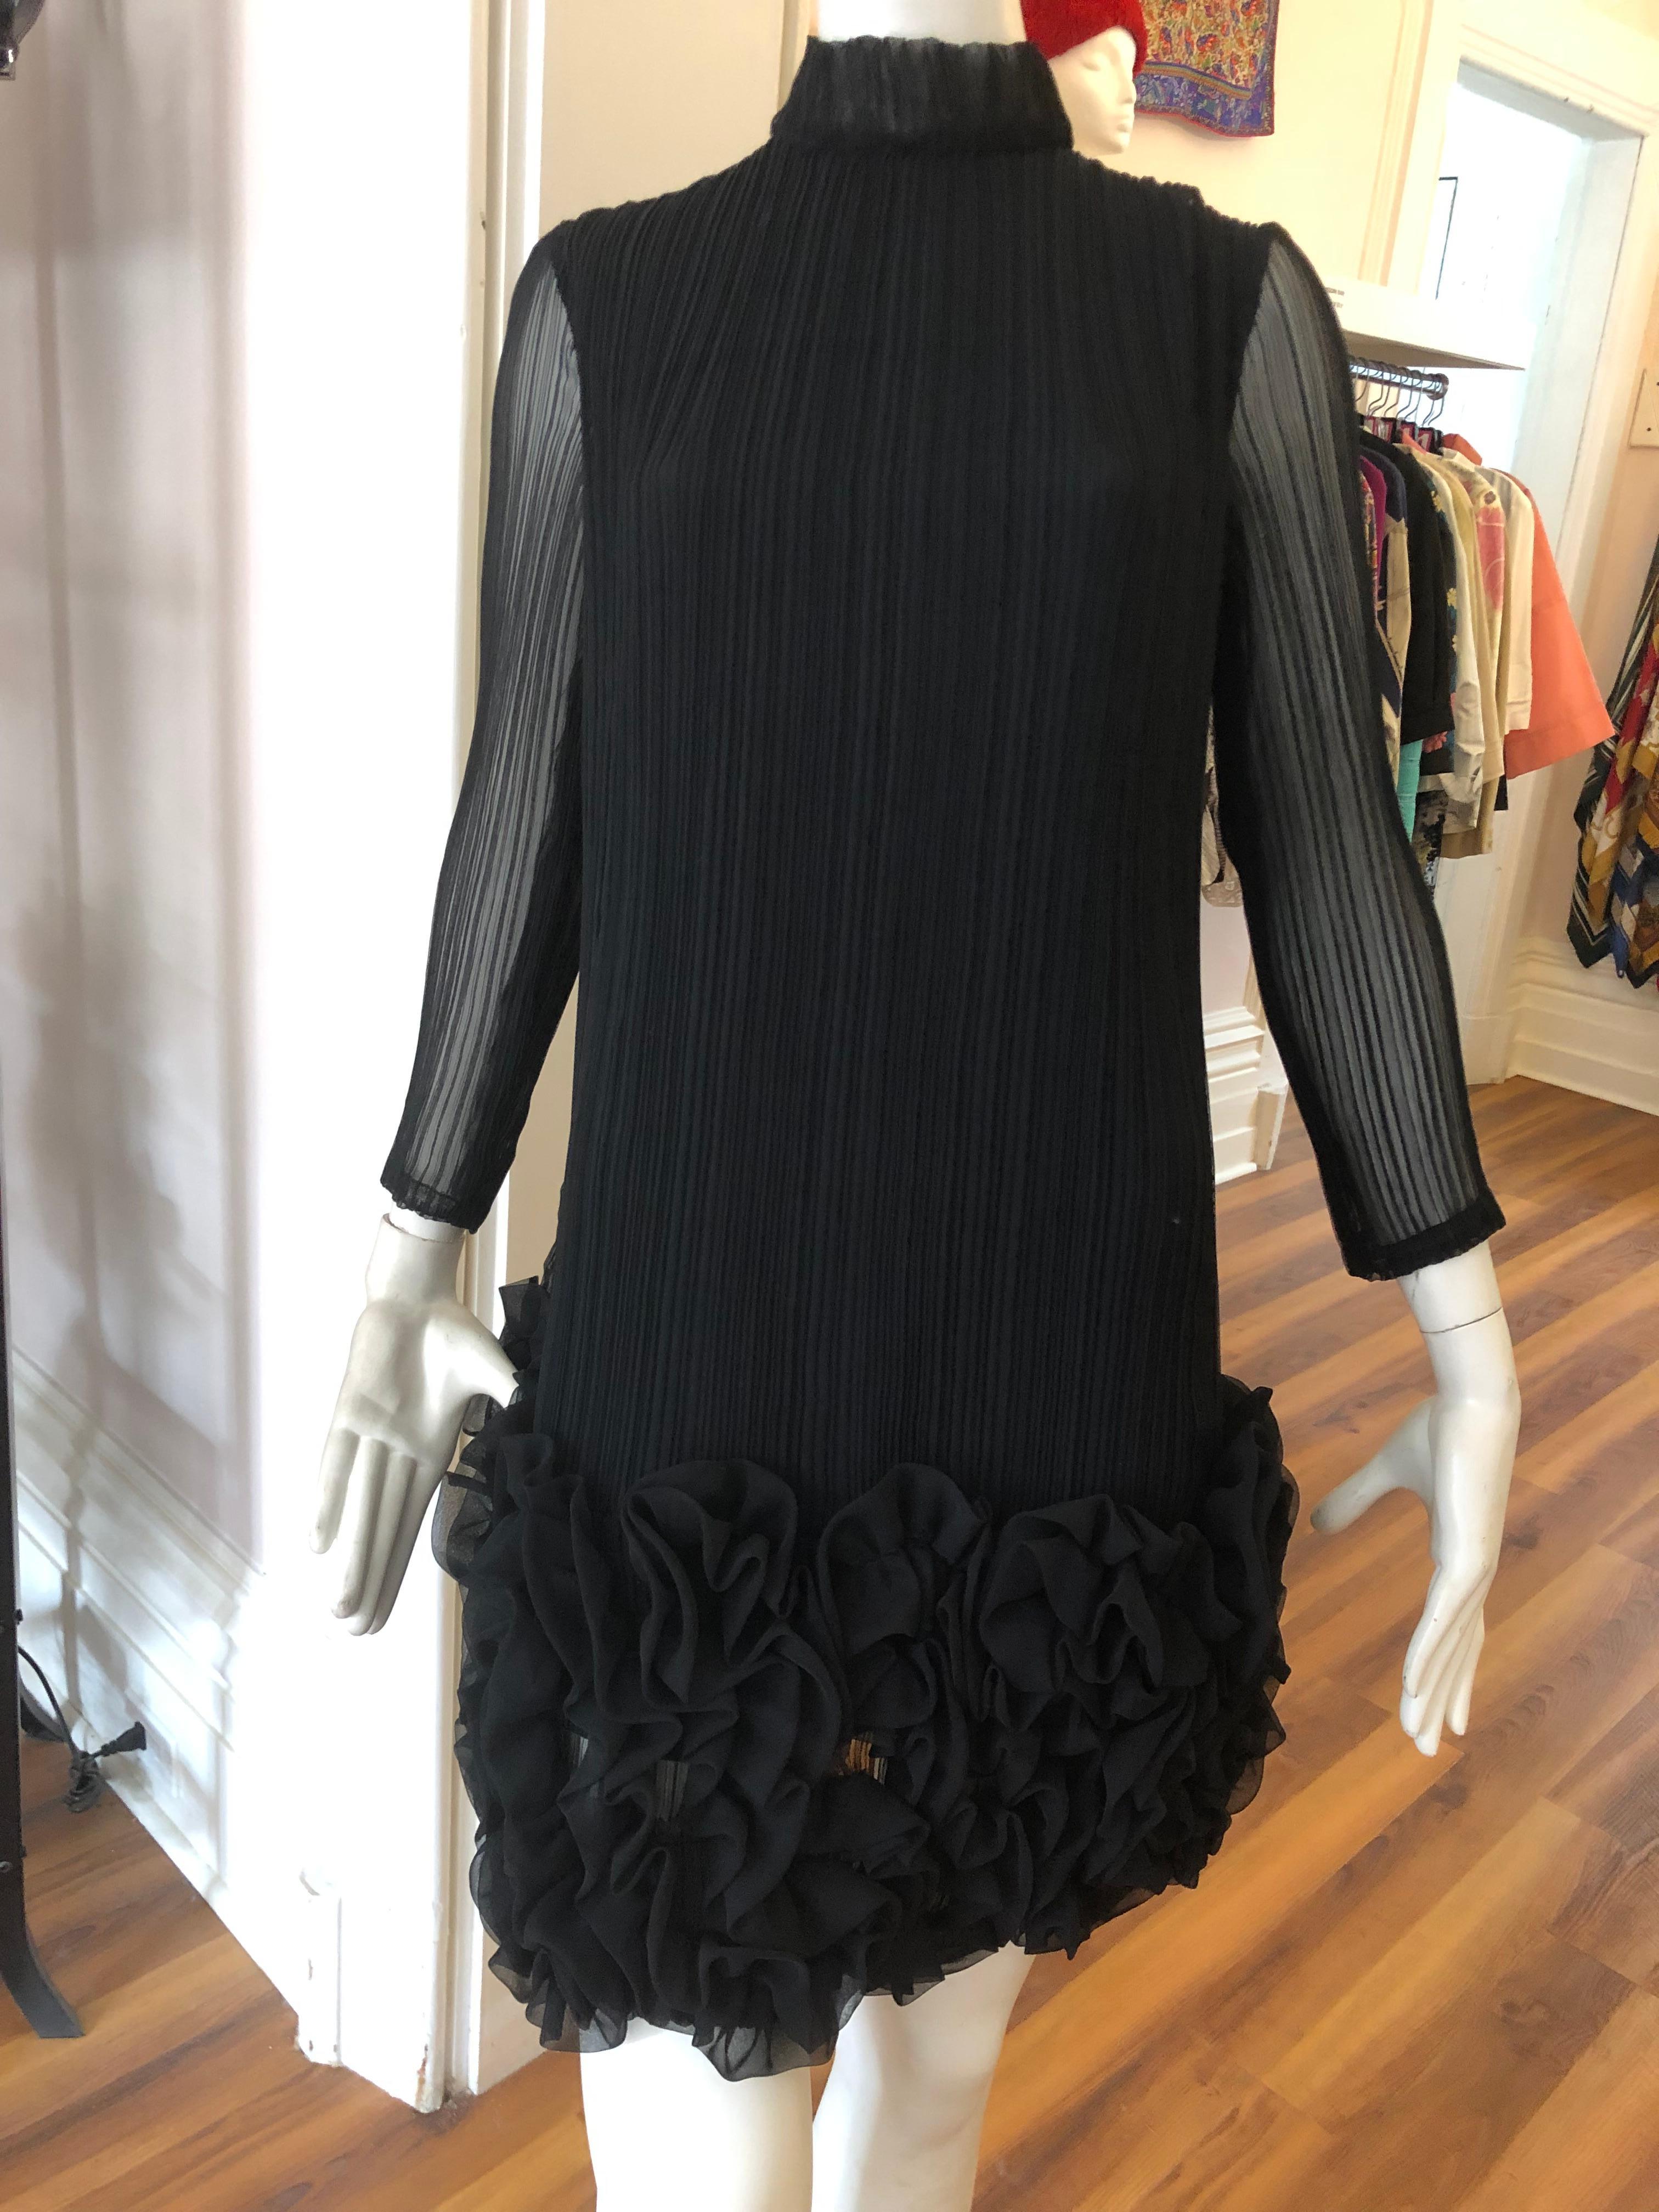 Wonderful permanent pleat dress, with elaborate ruching at bottom in a quasi floral pattern. The dress has a high neckline; see through sleeves and is lined. Closure is by way of a hidden centre back zipper. This is a truly magnificent piece in